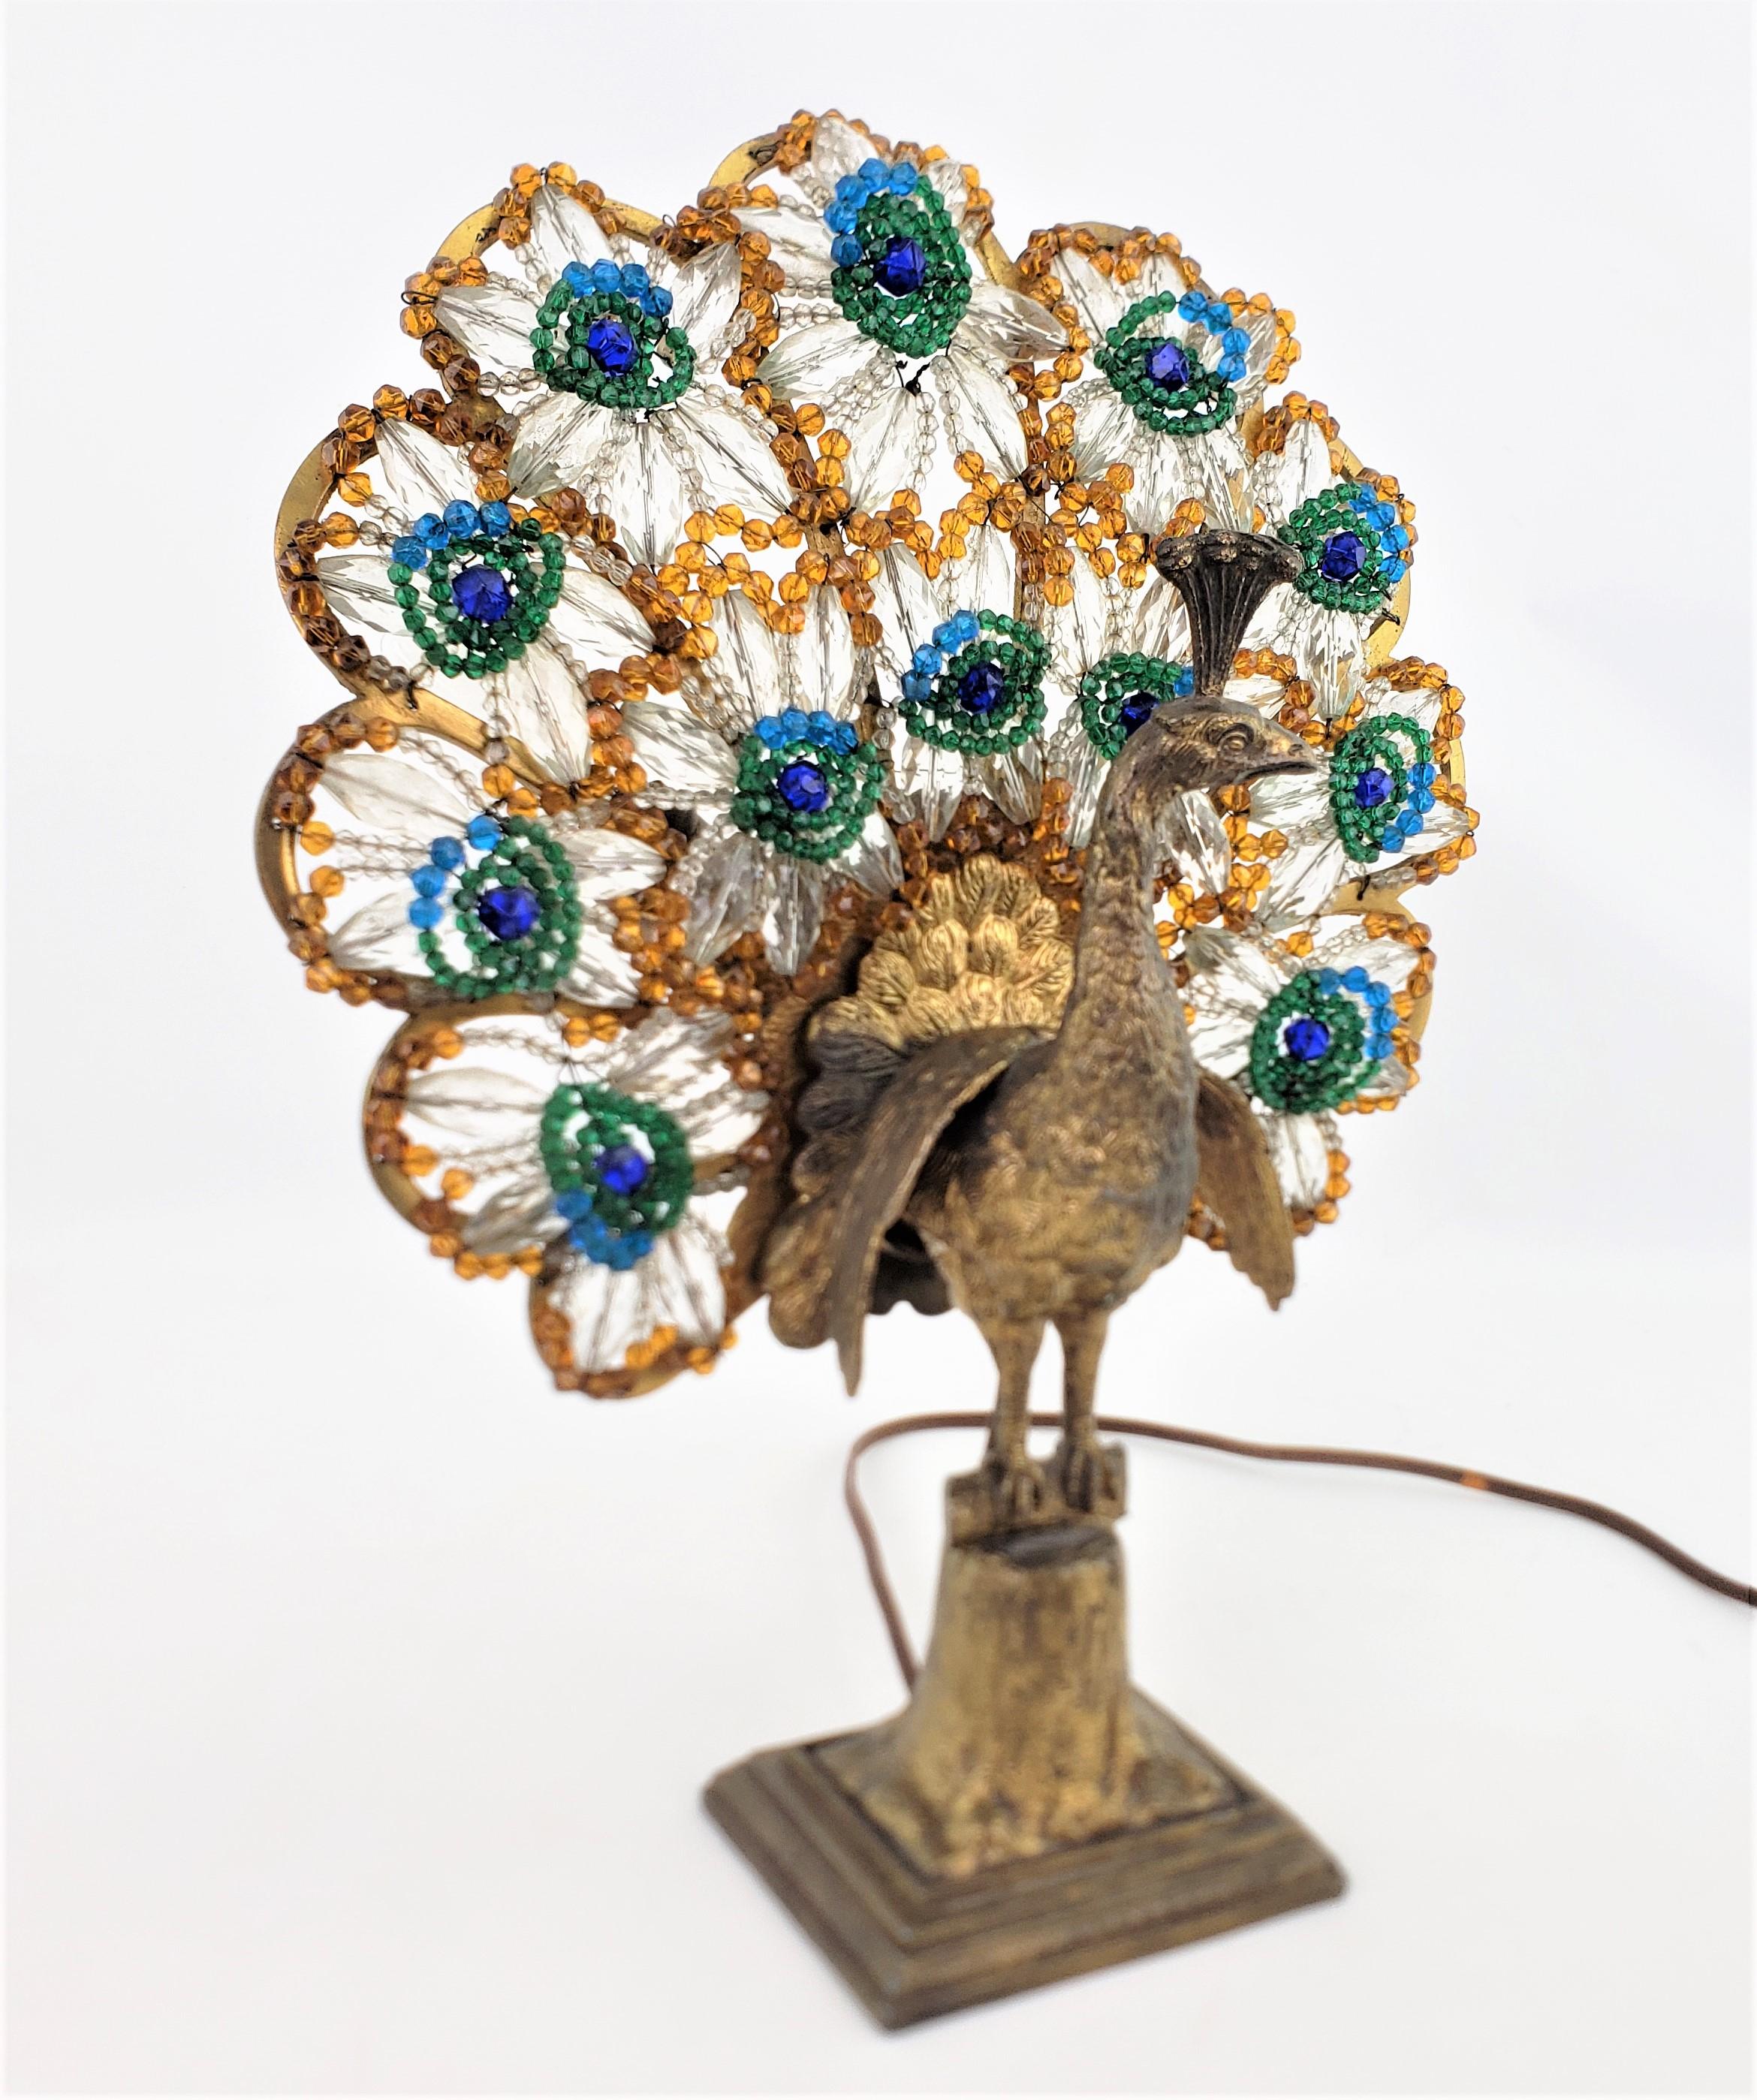 This antique figural peacock lamp is unsigned, but presumed to have been in the former Czech Republic in approximately 1920 in a period Art Deco style. The lamp is ornately cast of spelter and show considerable detail in the feathers and body, which